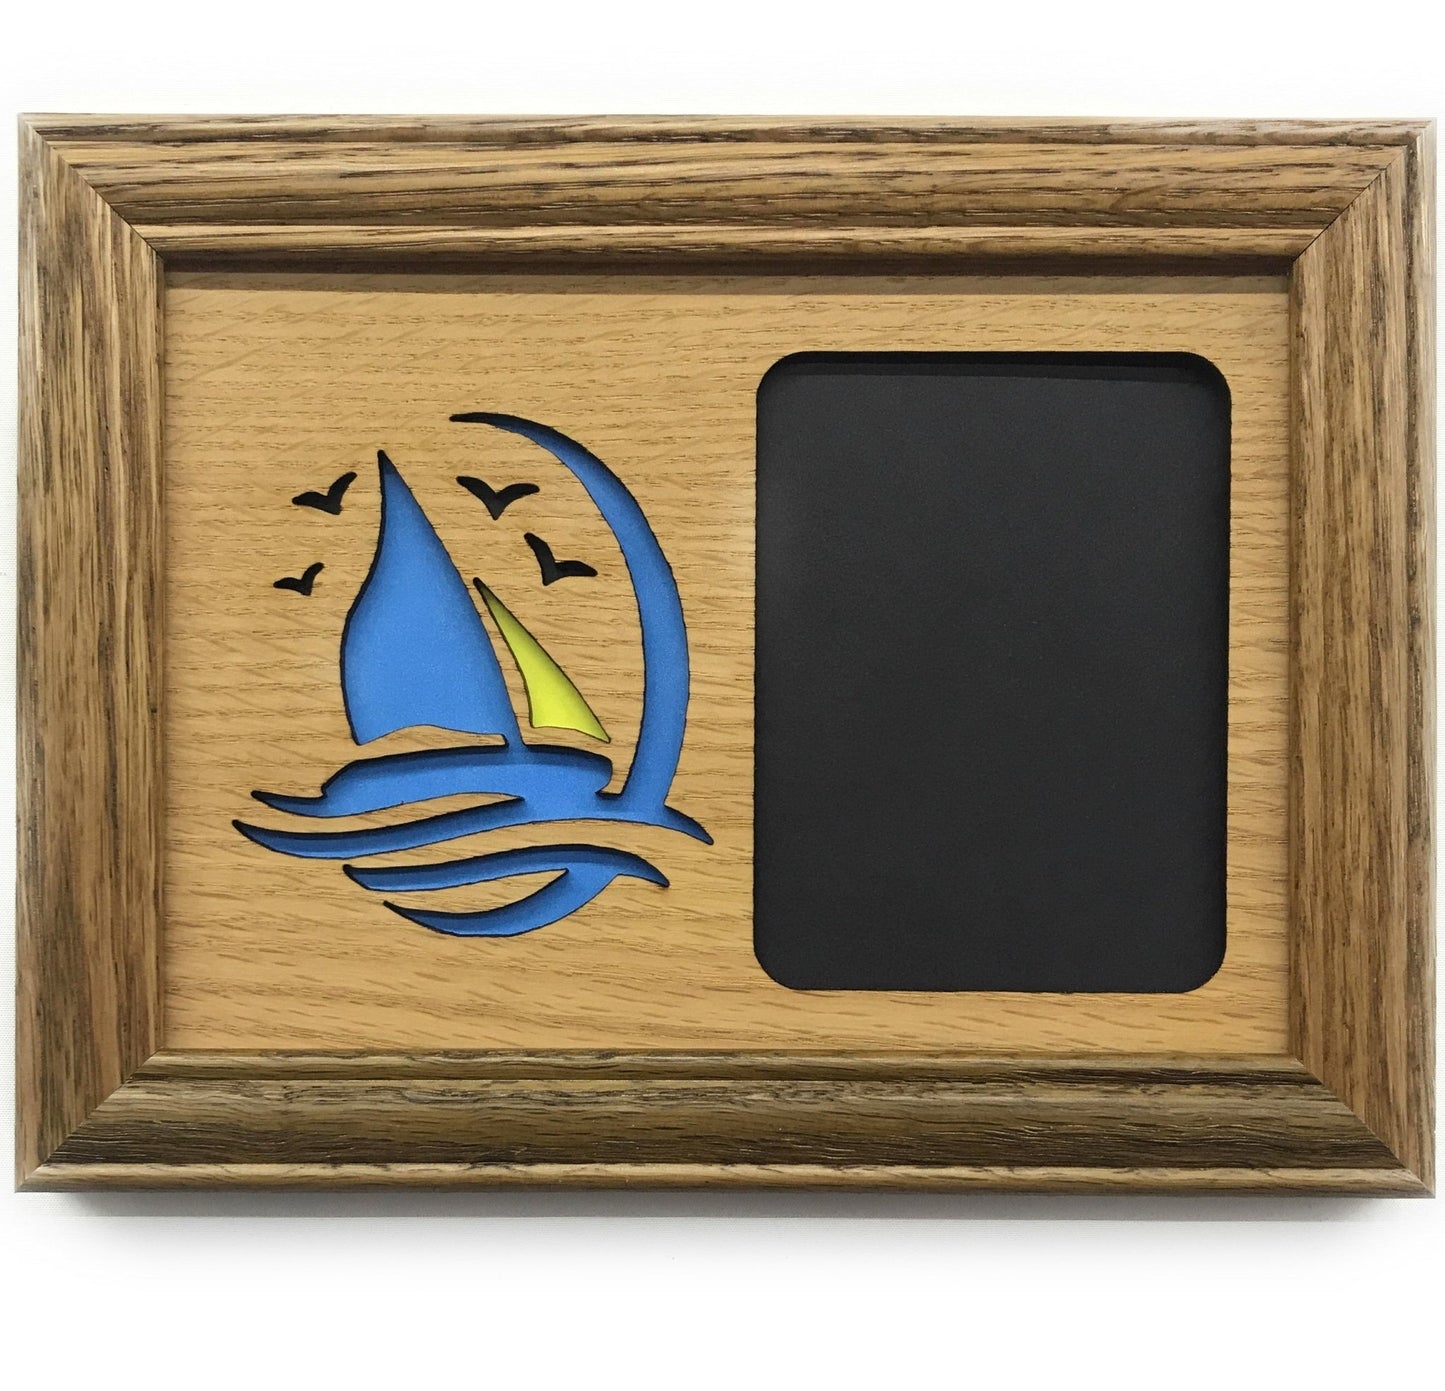 Sail Boat Picture Frame - 5x7 Frame Hold 3x4 Photo - Legacy Images - Picture Frames